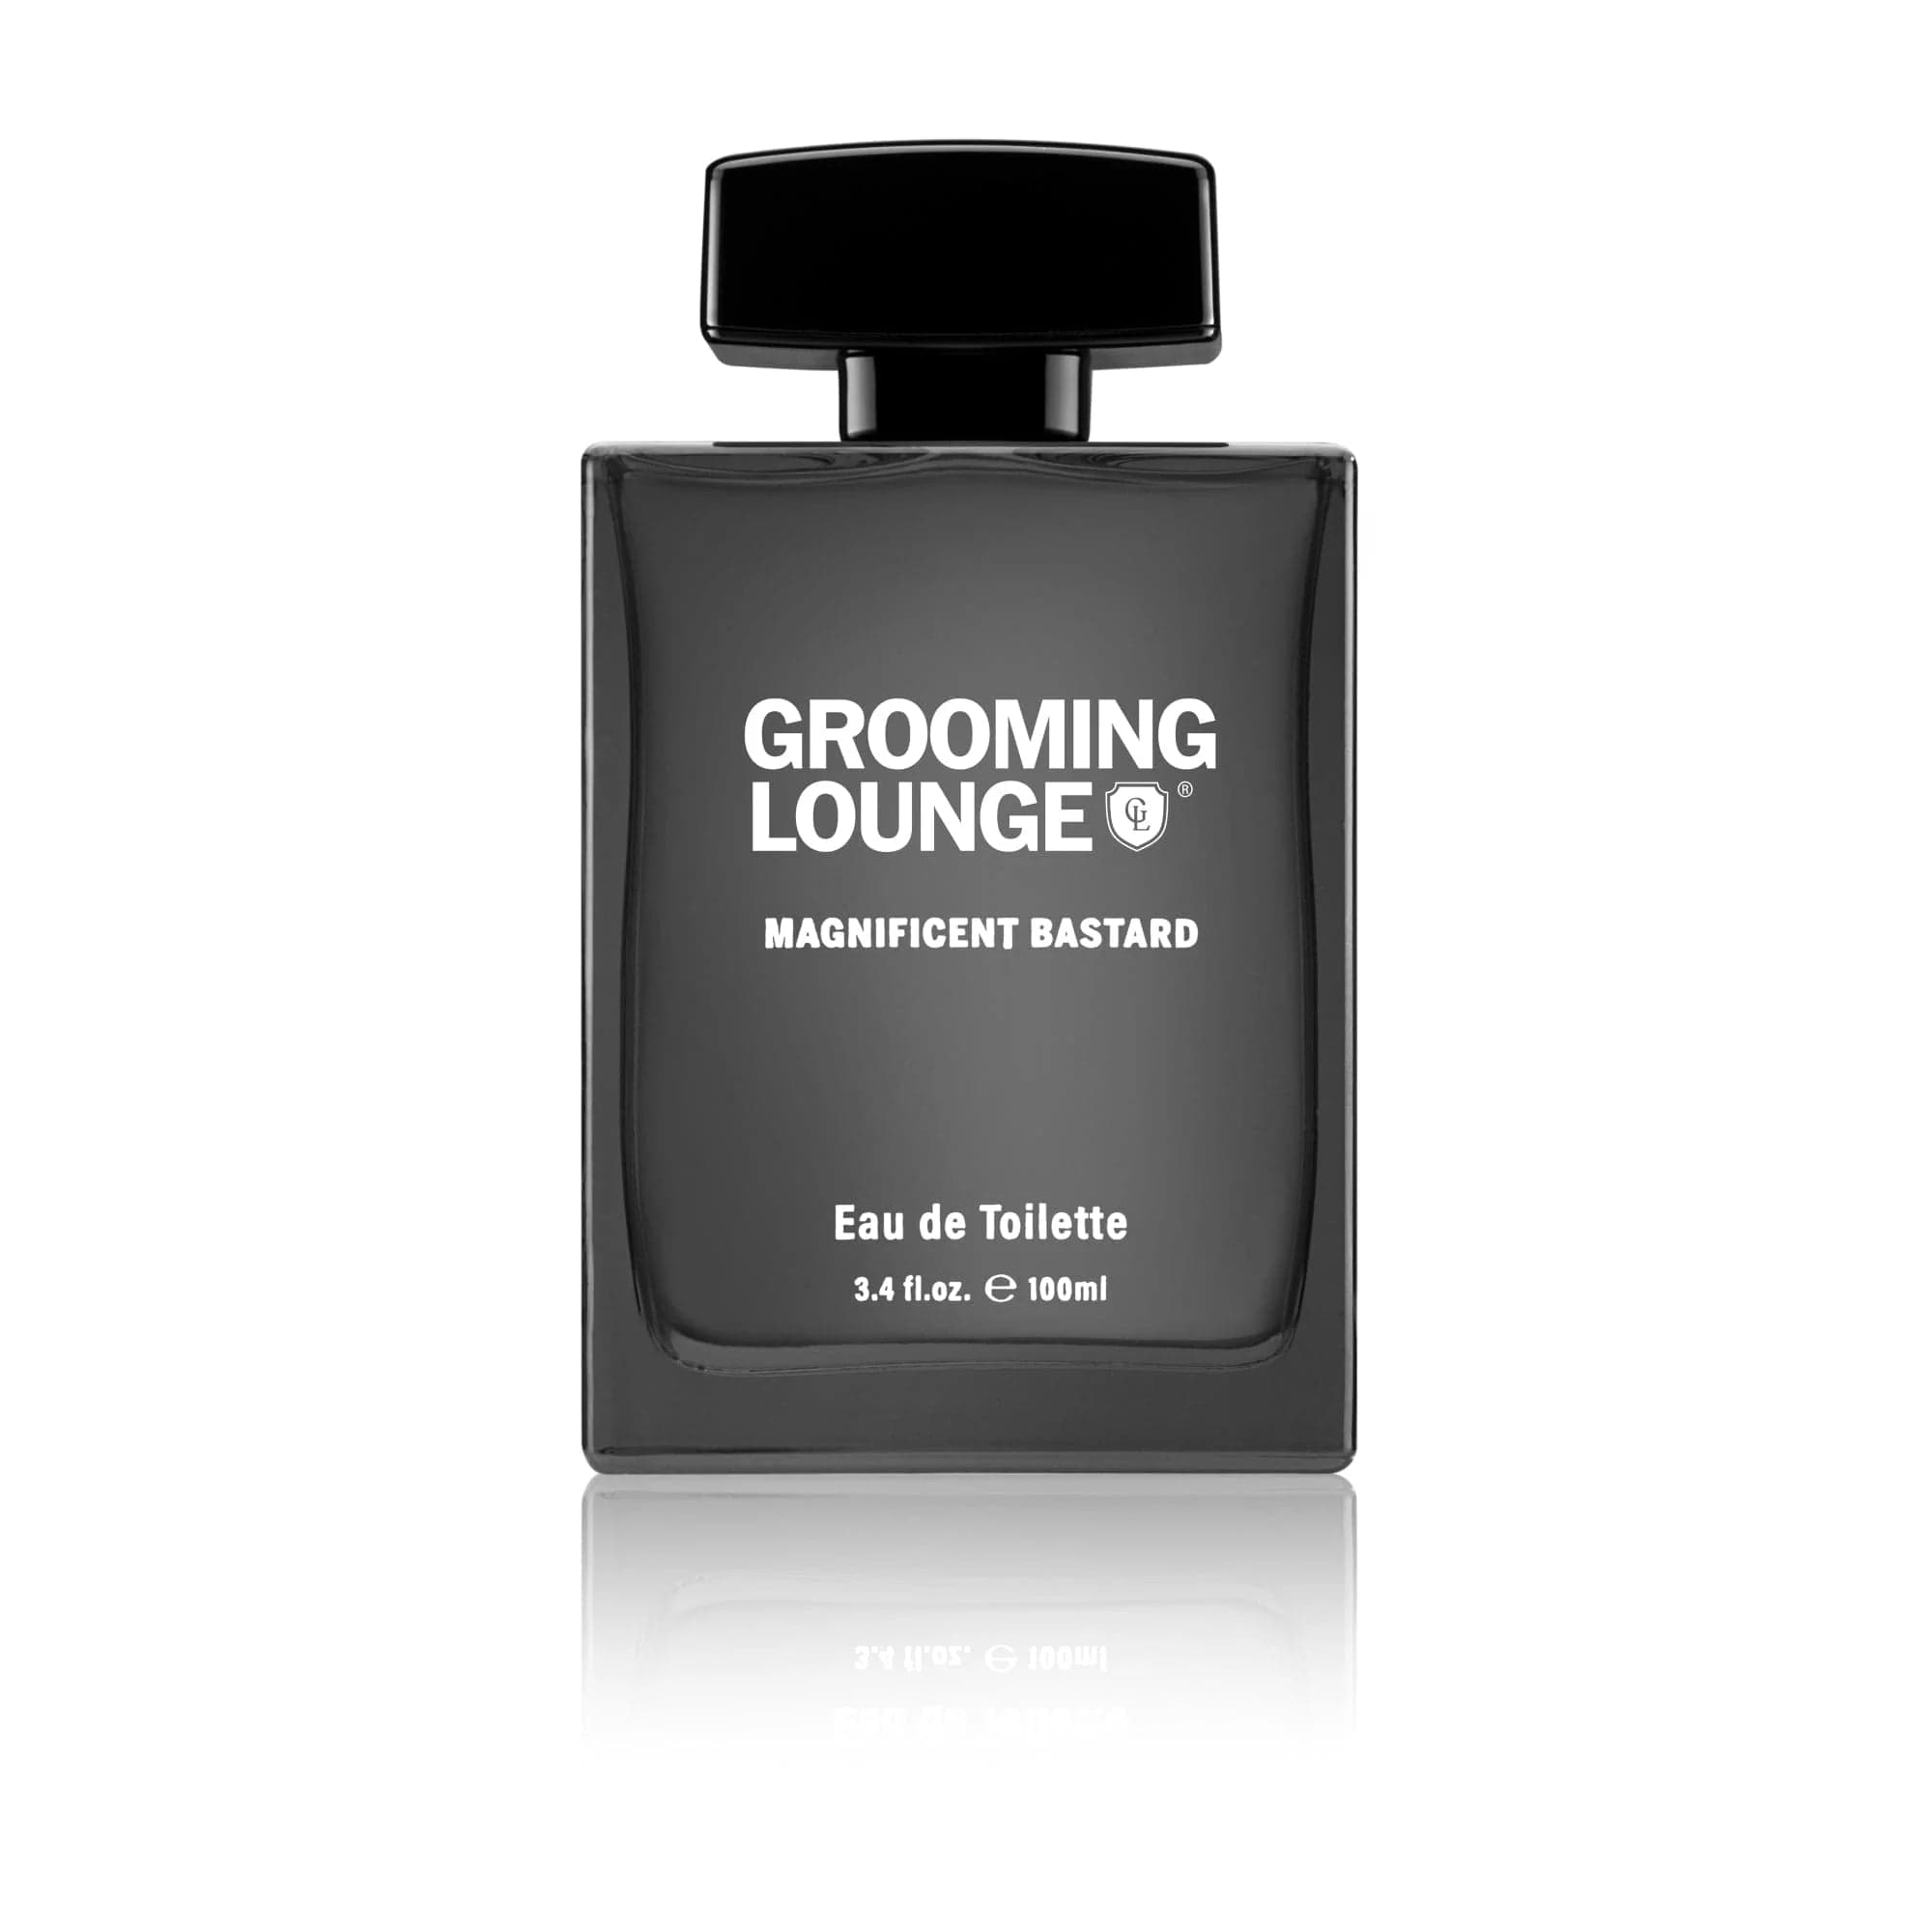 FREE Grooming Lounge Magnificent Bastard EDT With Any $55+ purchase